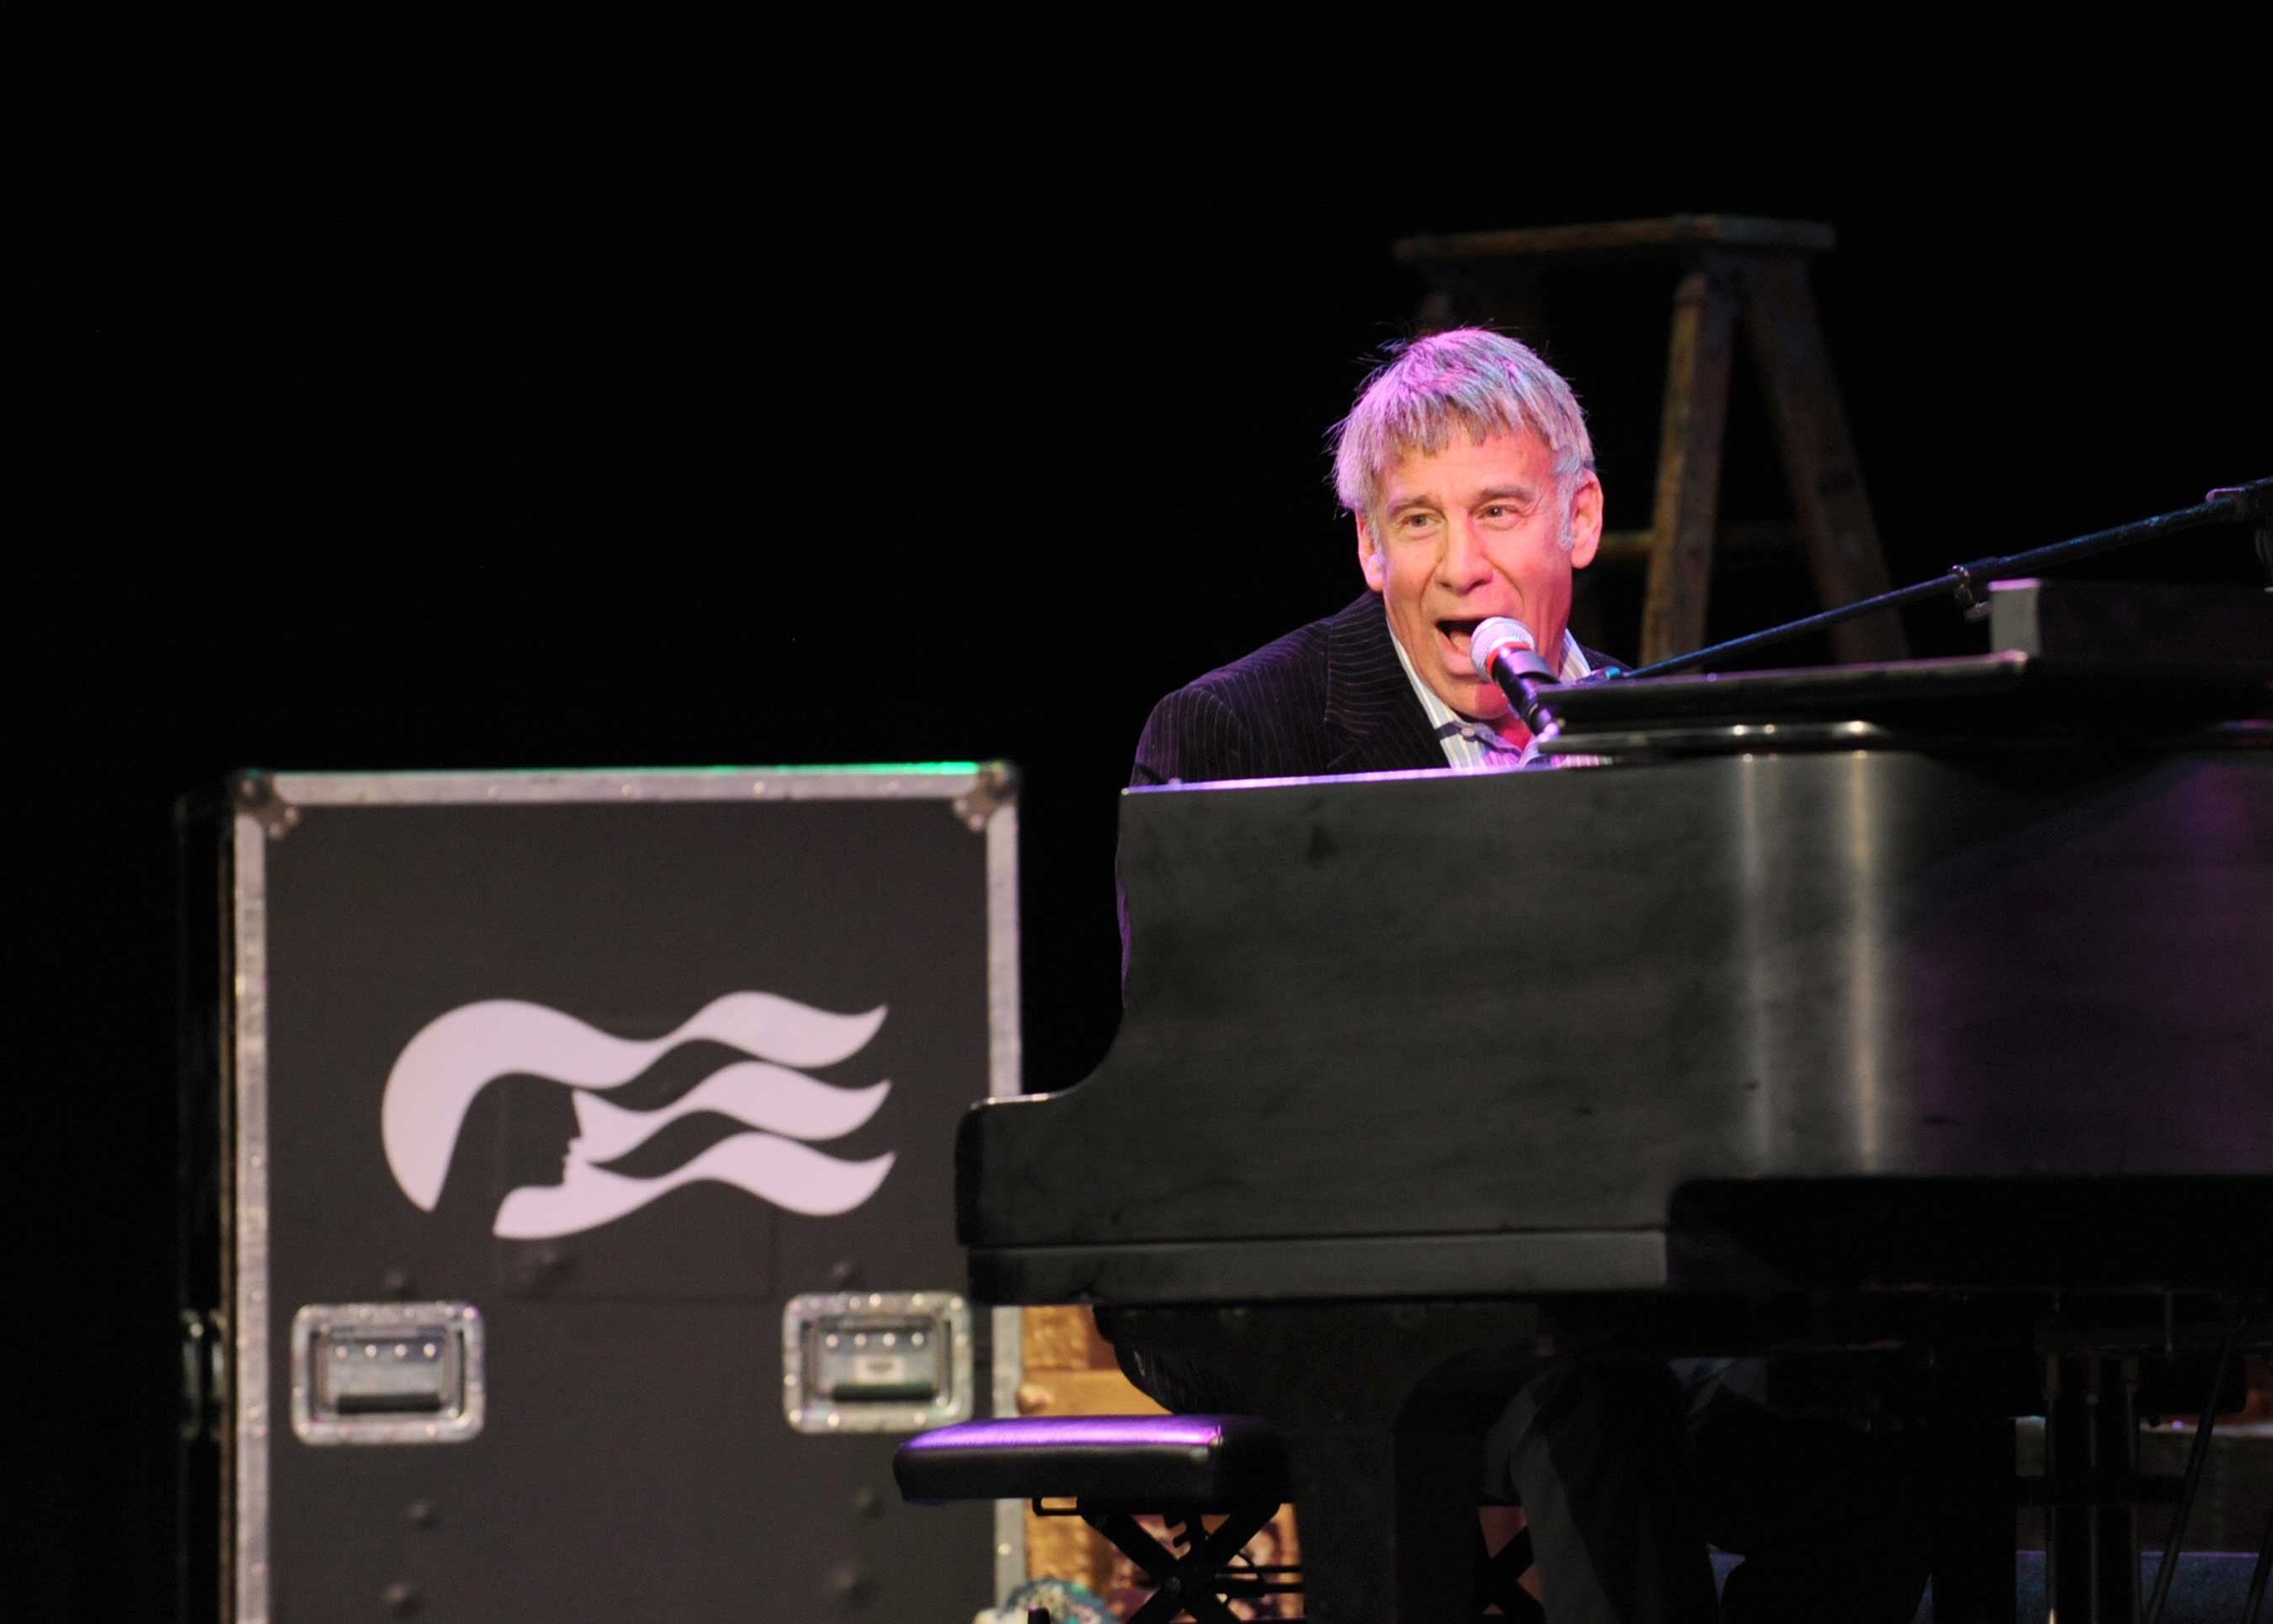 Princess Cruises partnered with Stephen Schwartz, the Oscar, Grammy and Tony award-winning composer of Wicked, Pippin and Godspell on the first-of-its-kind.